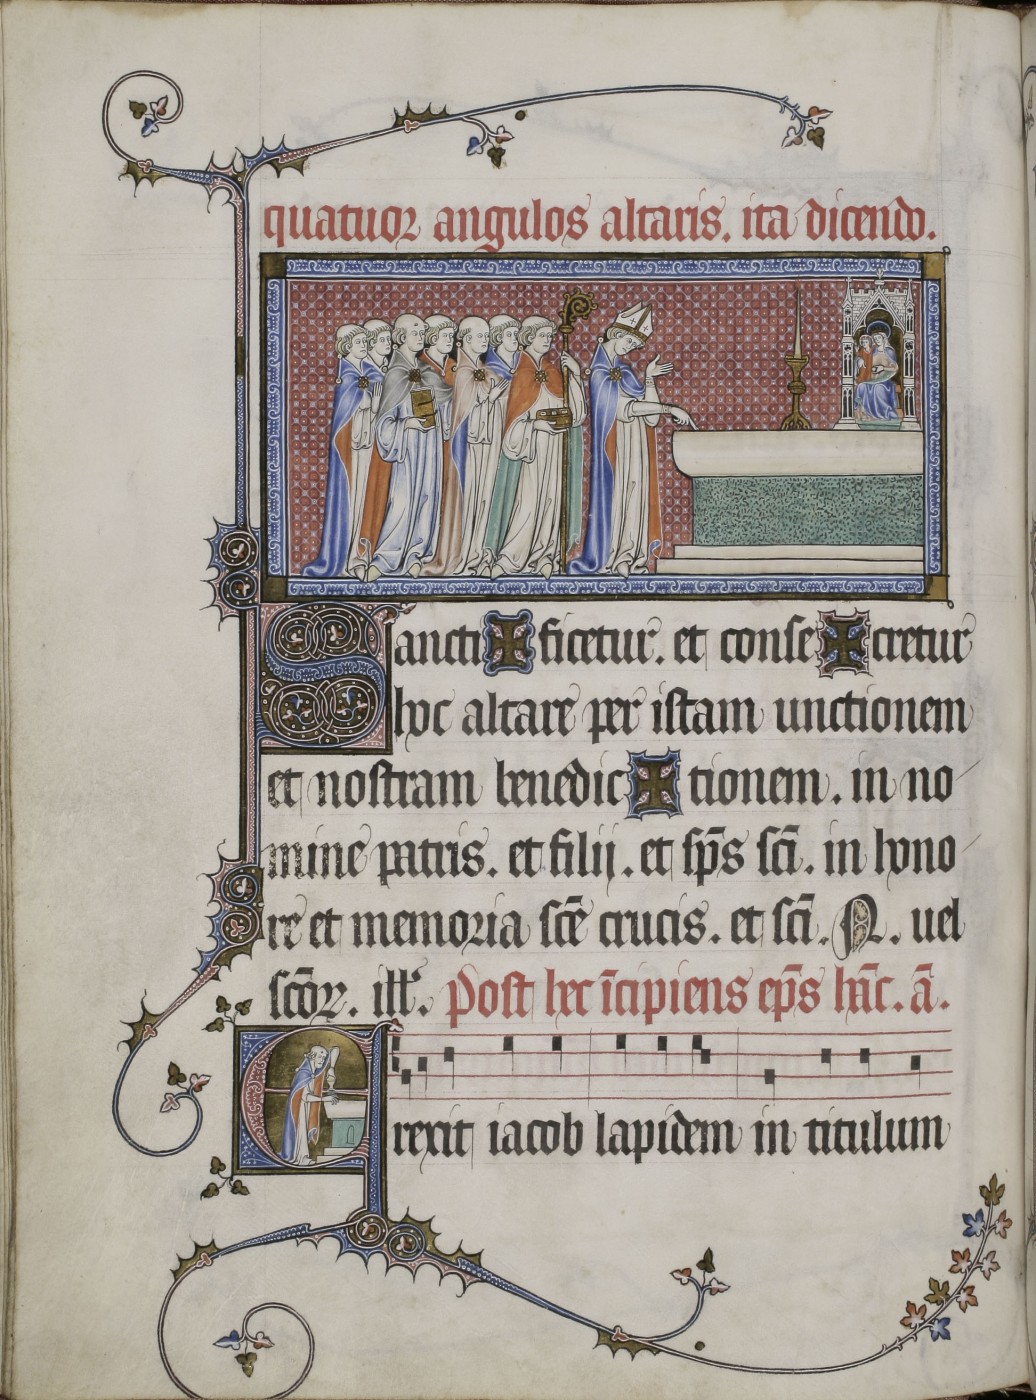 Folio 31 v
Bishop anointing an altar with oil (Office for the Dedication of a Church)